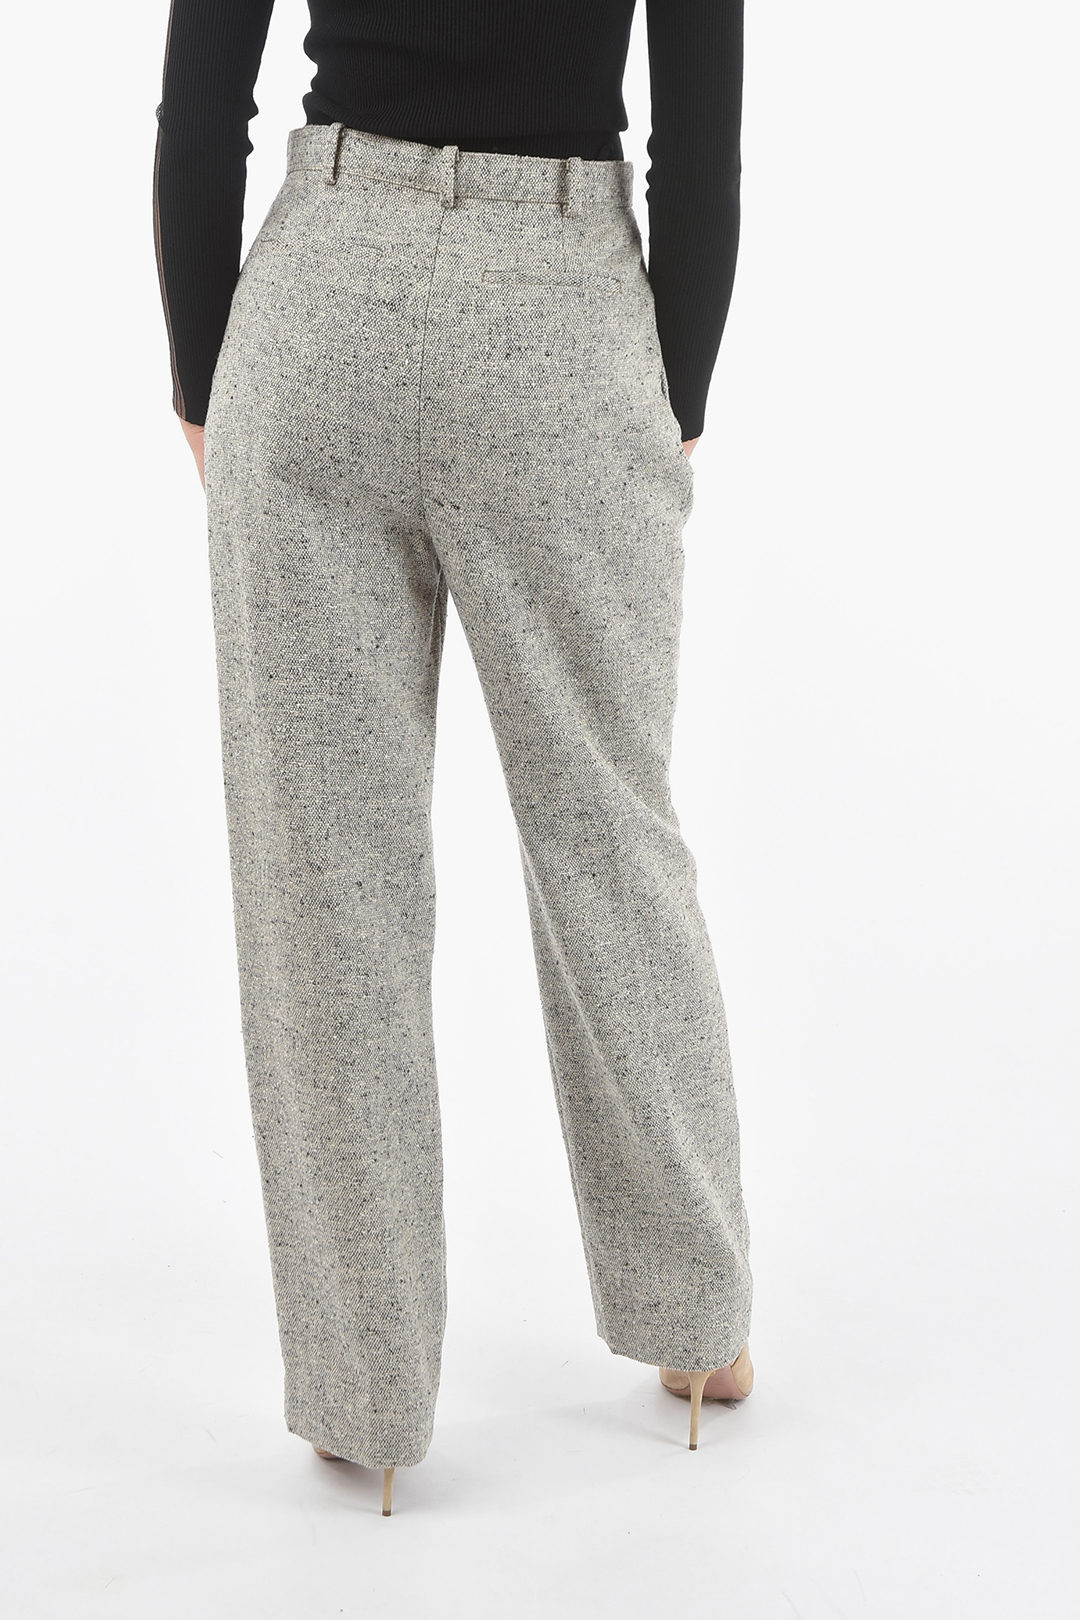 Tory Burch Wool Linen-blend High-waisted Wide-leg Pants with Double-pleat  women - Glamood Outlet